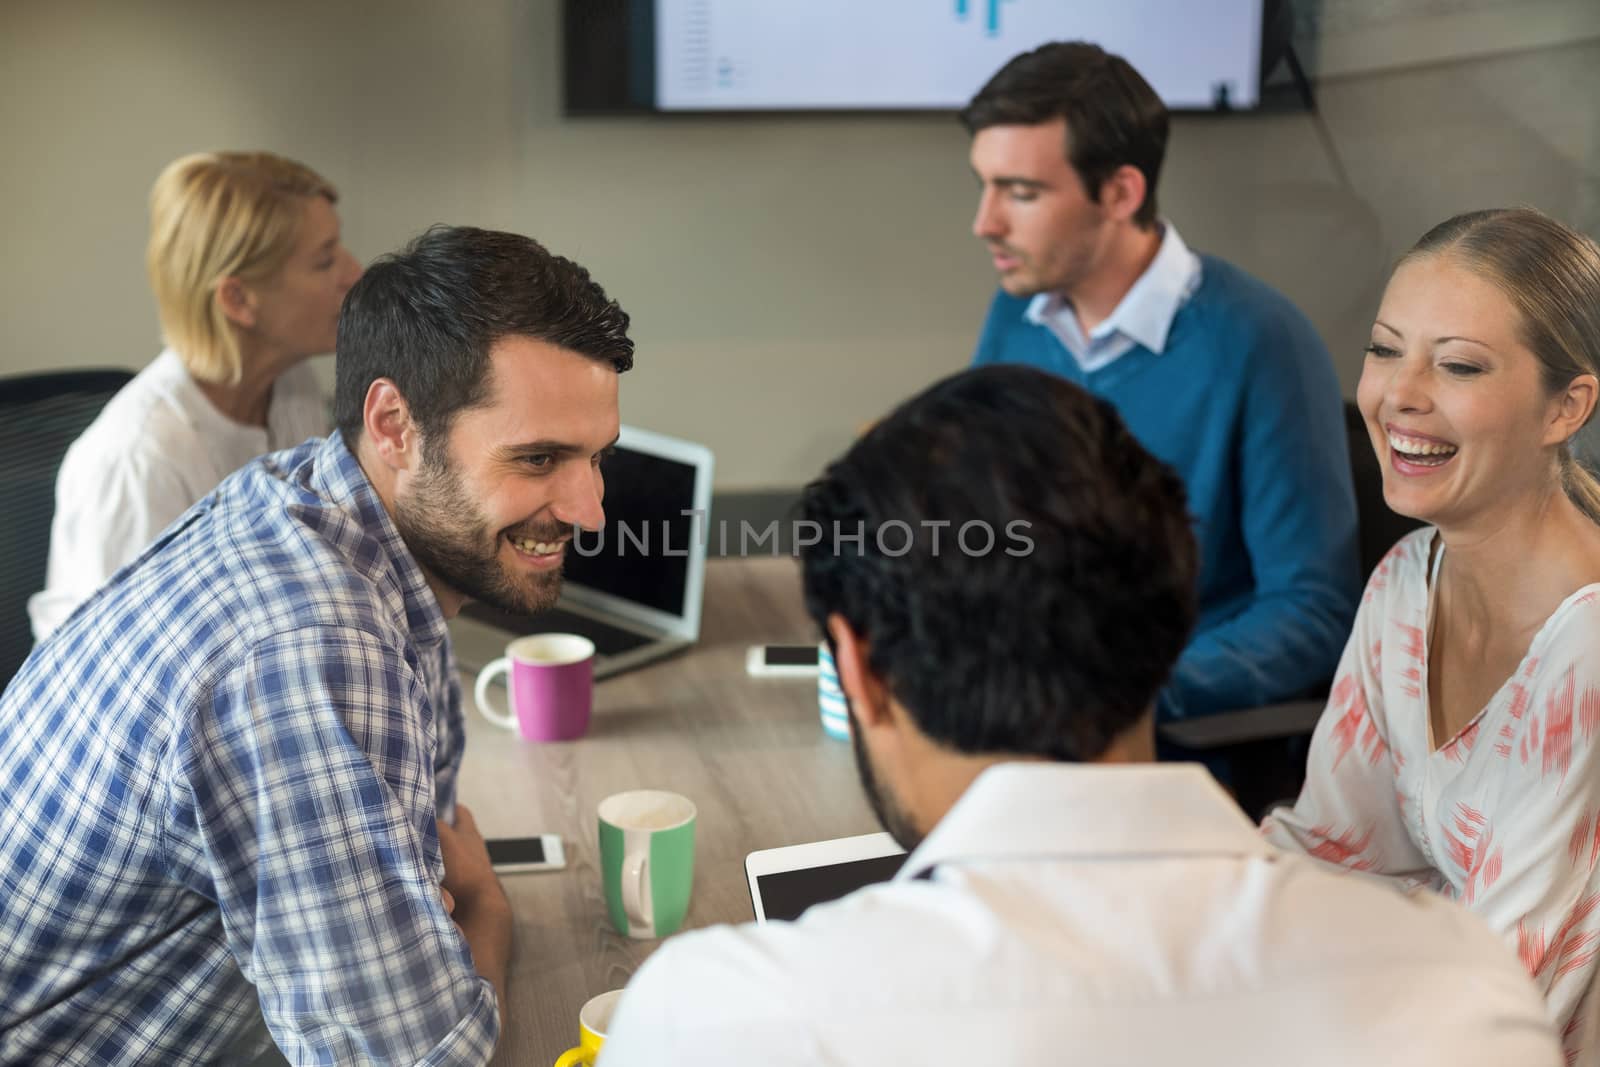 Business people interacting during a meeting in the office